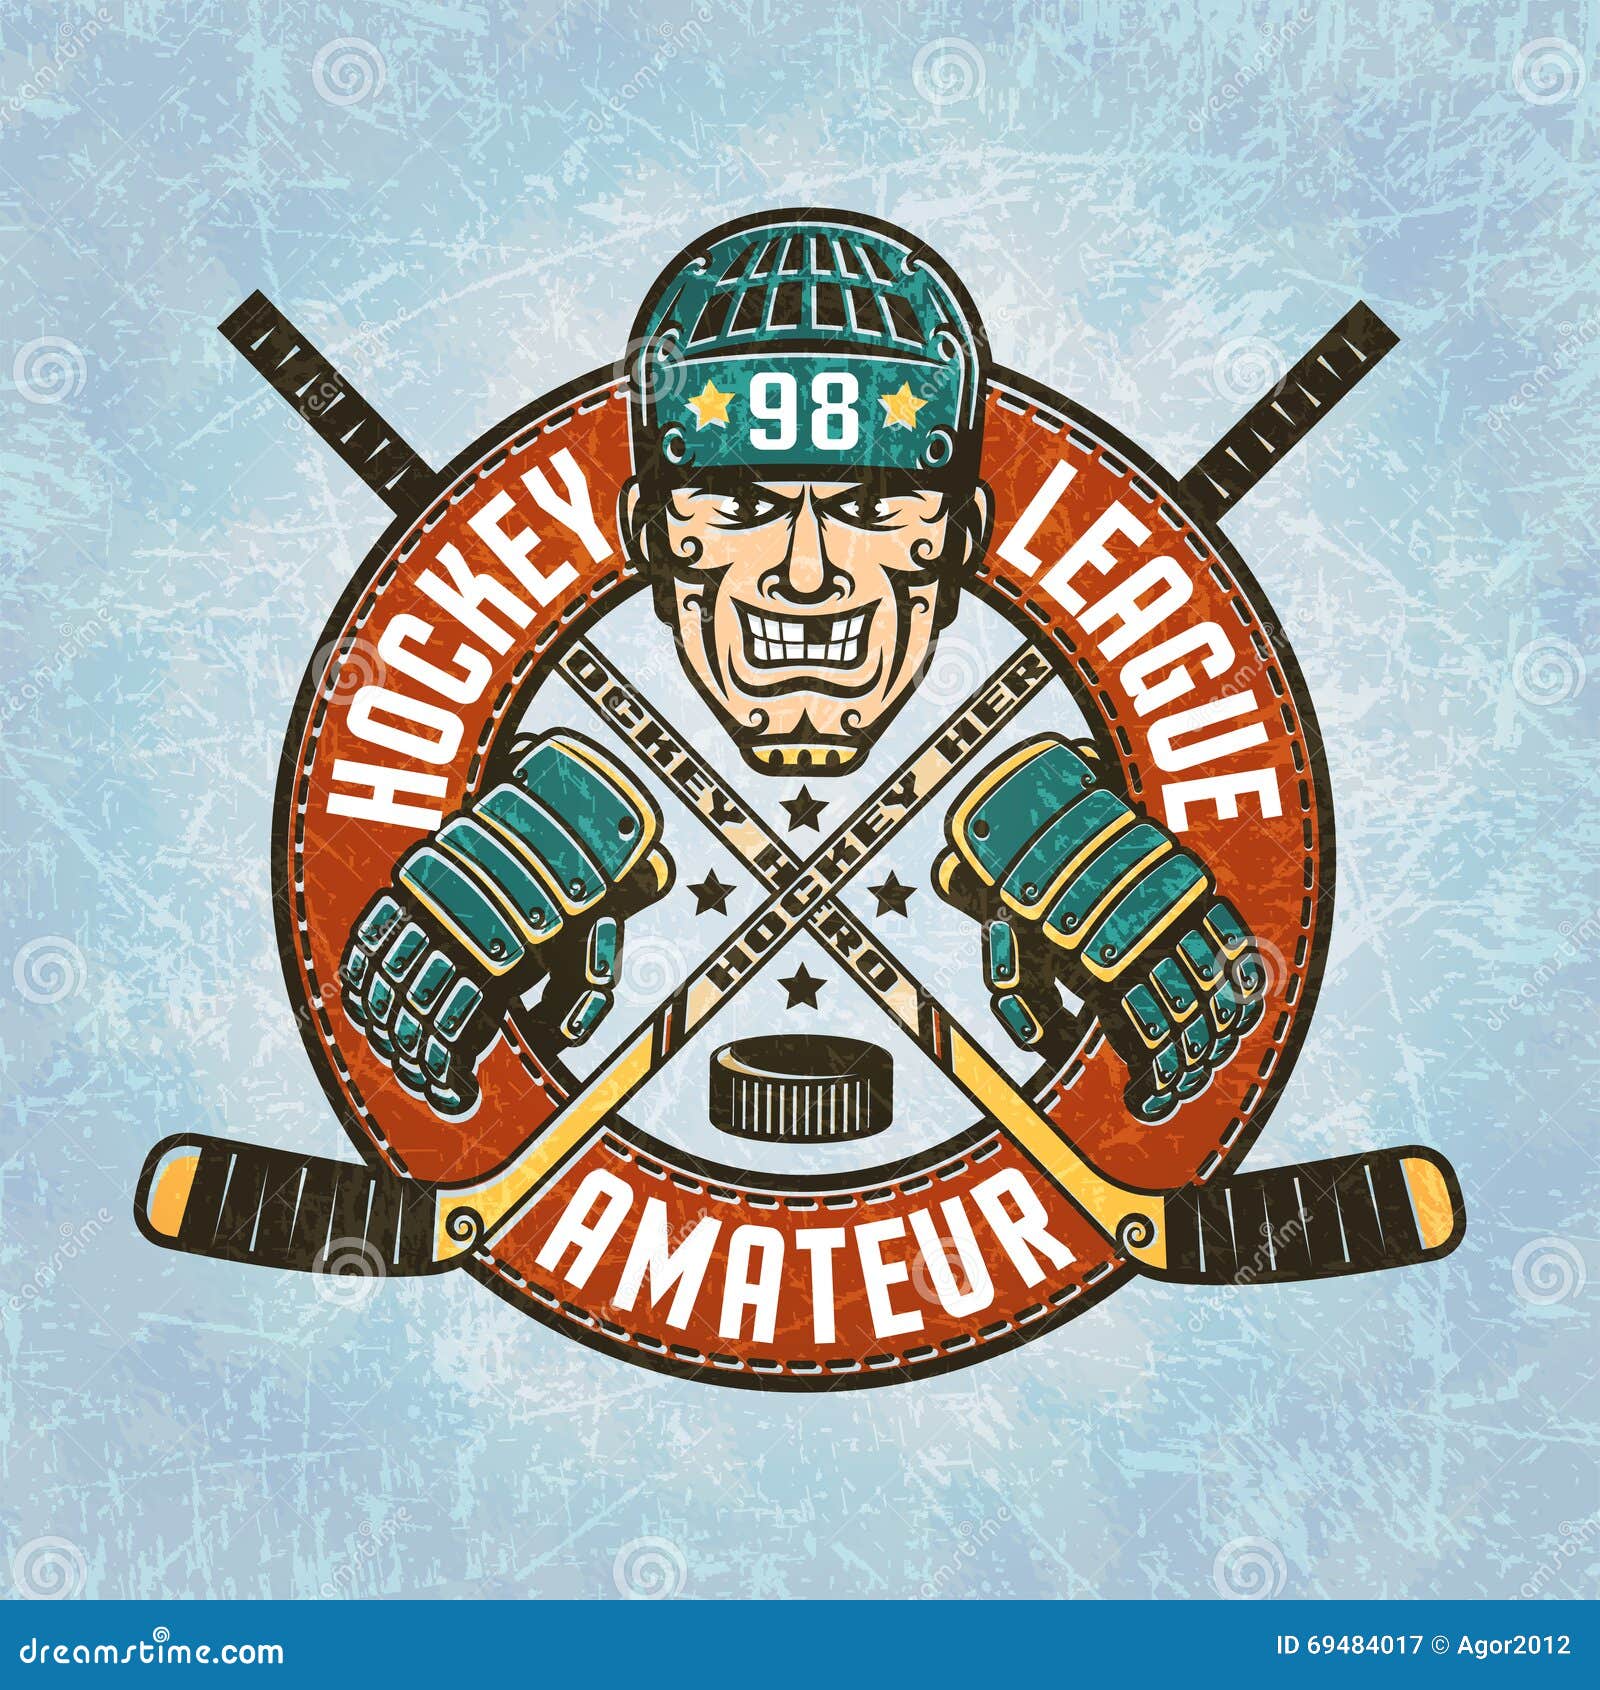 Hockey Puck And Stick  Great PowerPoint ClipArt for Presentations